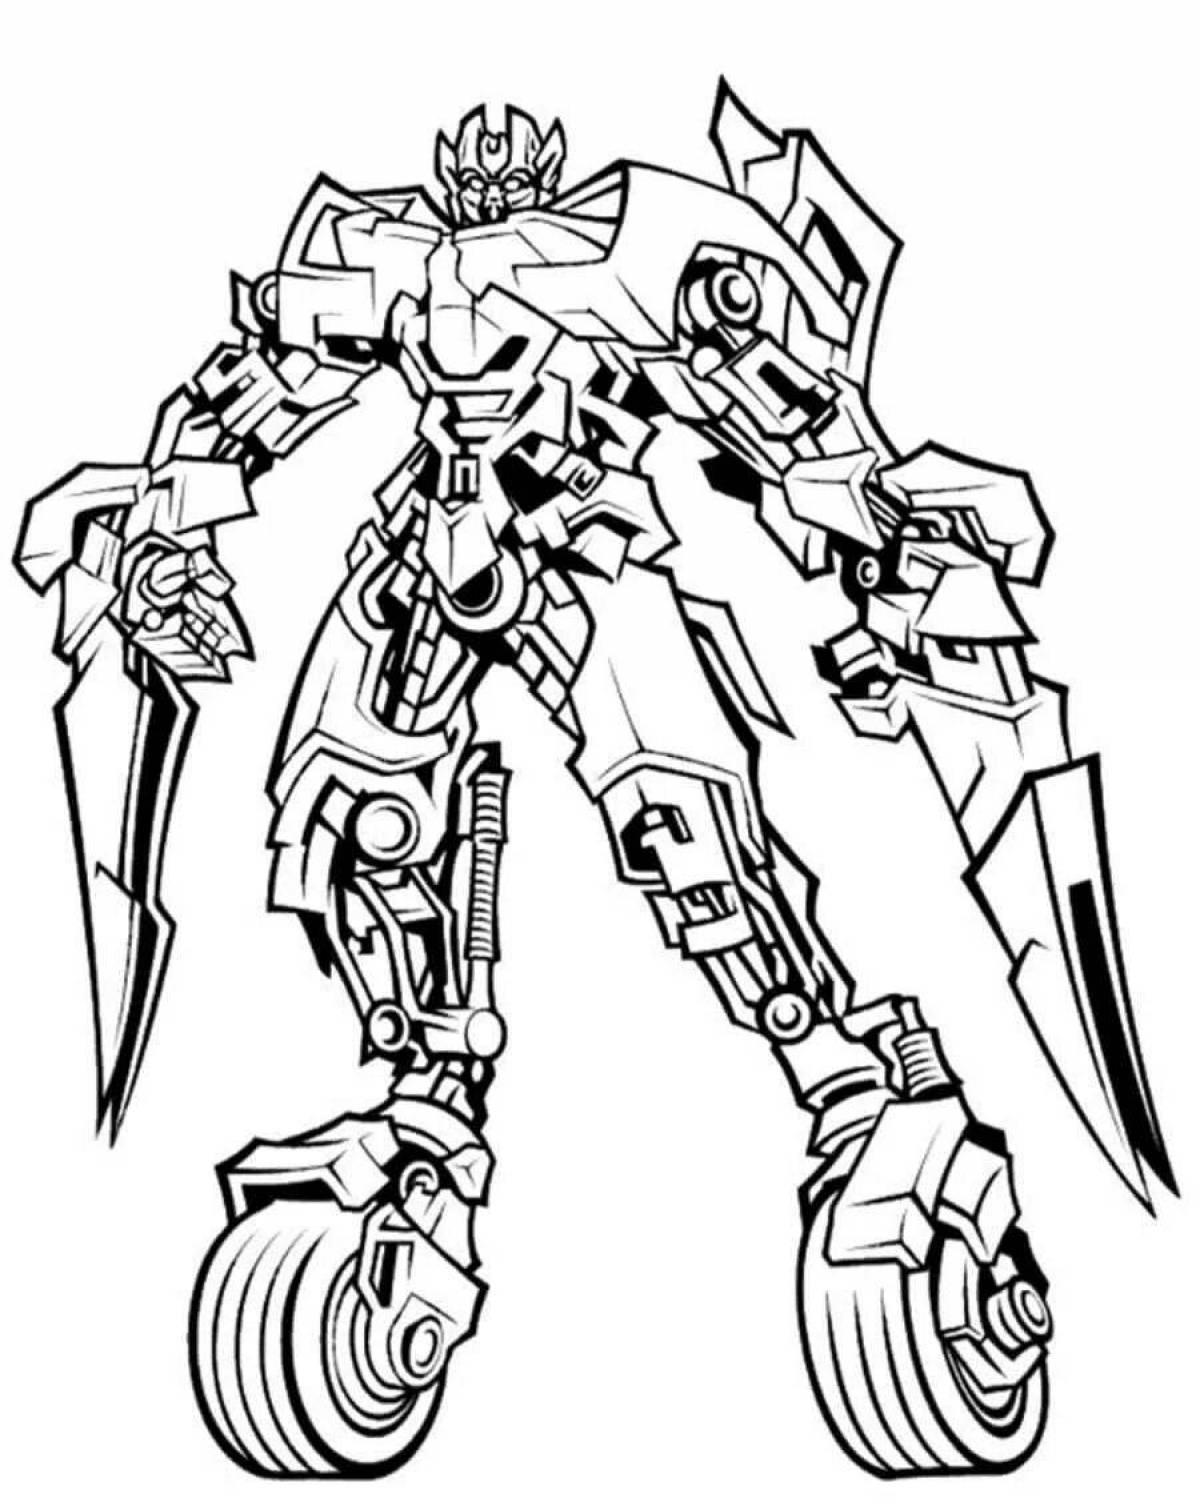 Funny Autobots coloring pages for kids